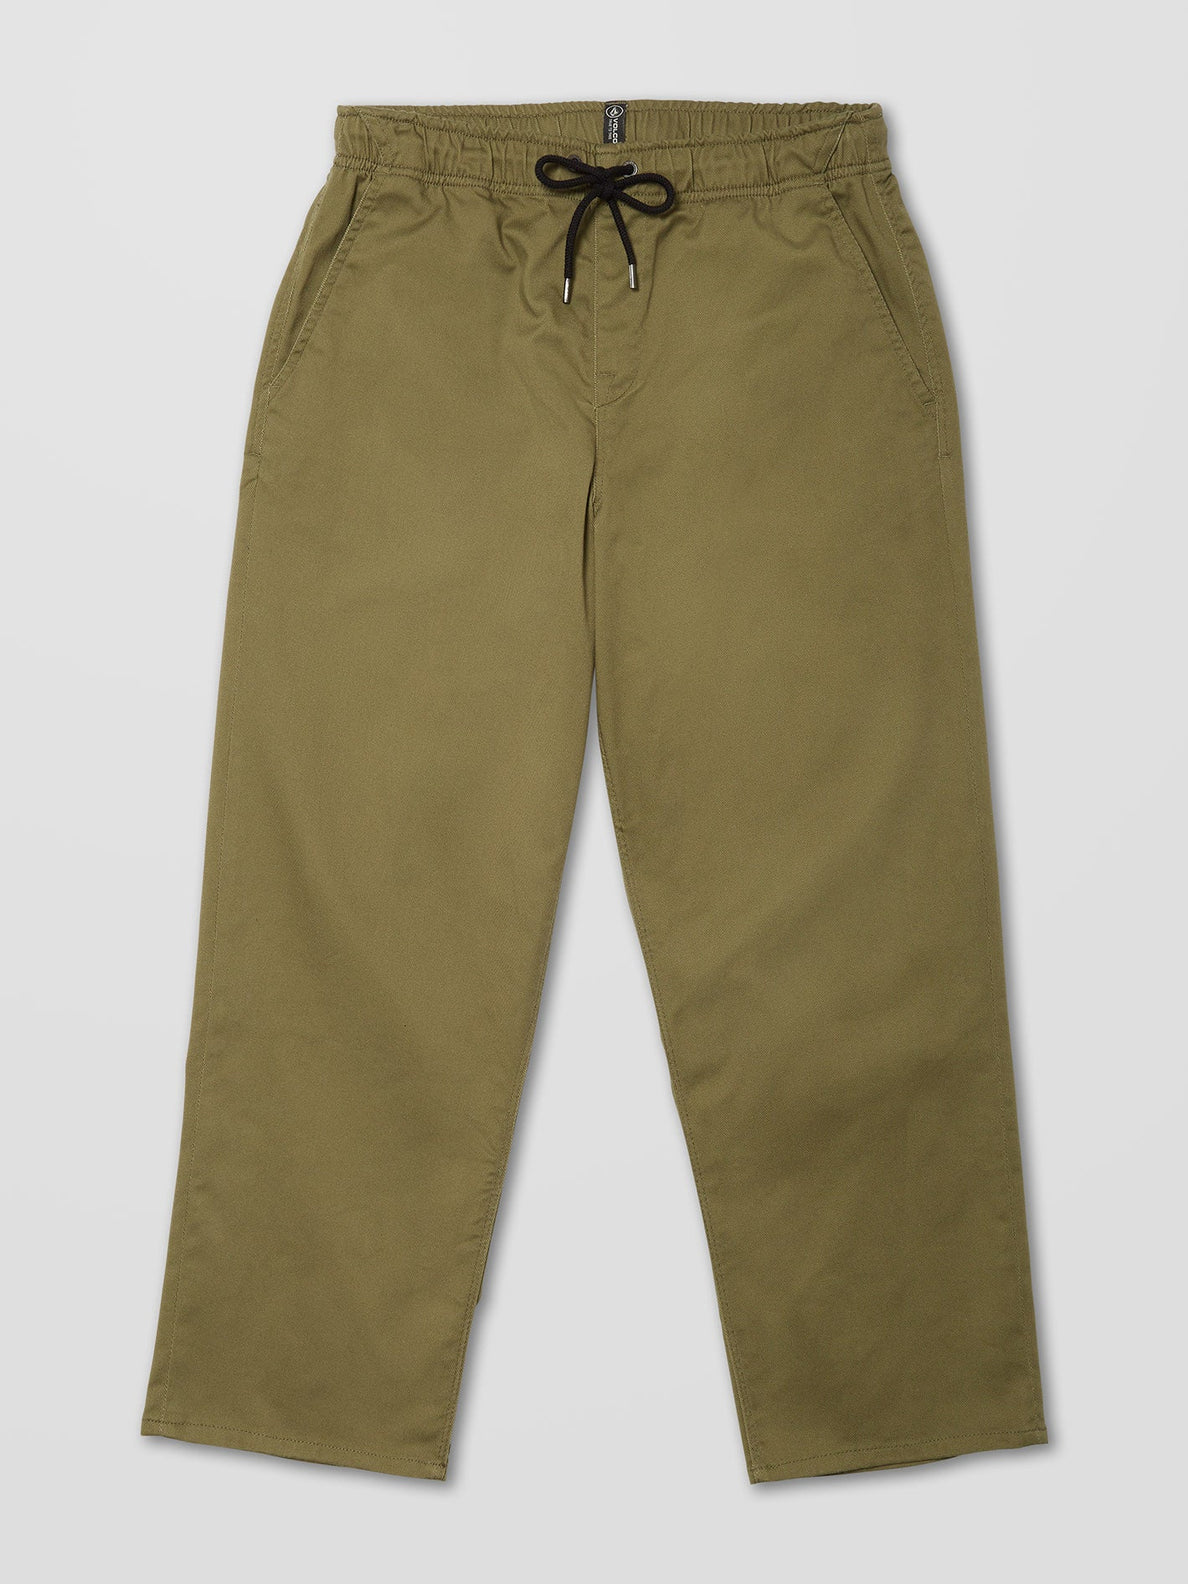 OUTER SPACED SOLID EW PANT (A1242004_MTO) [6]